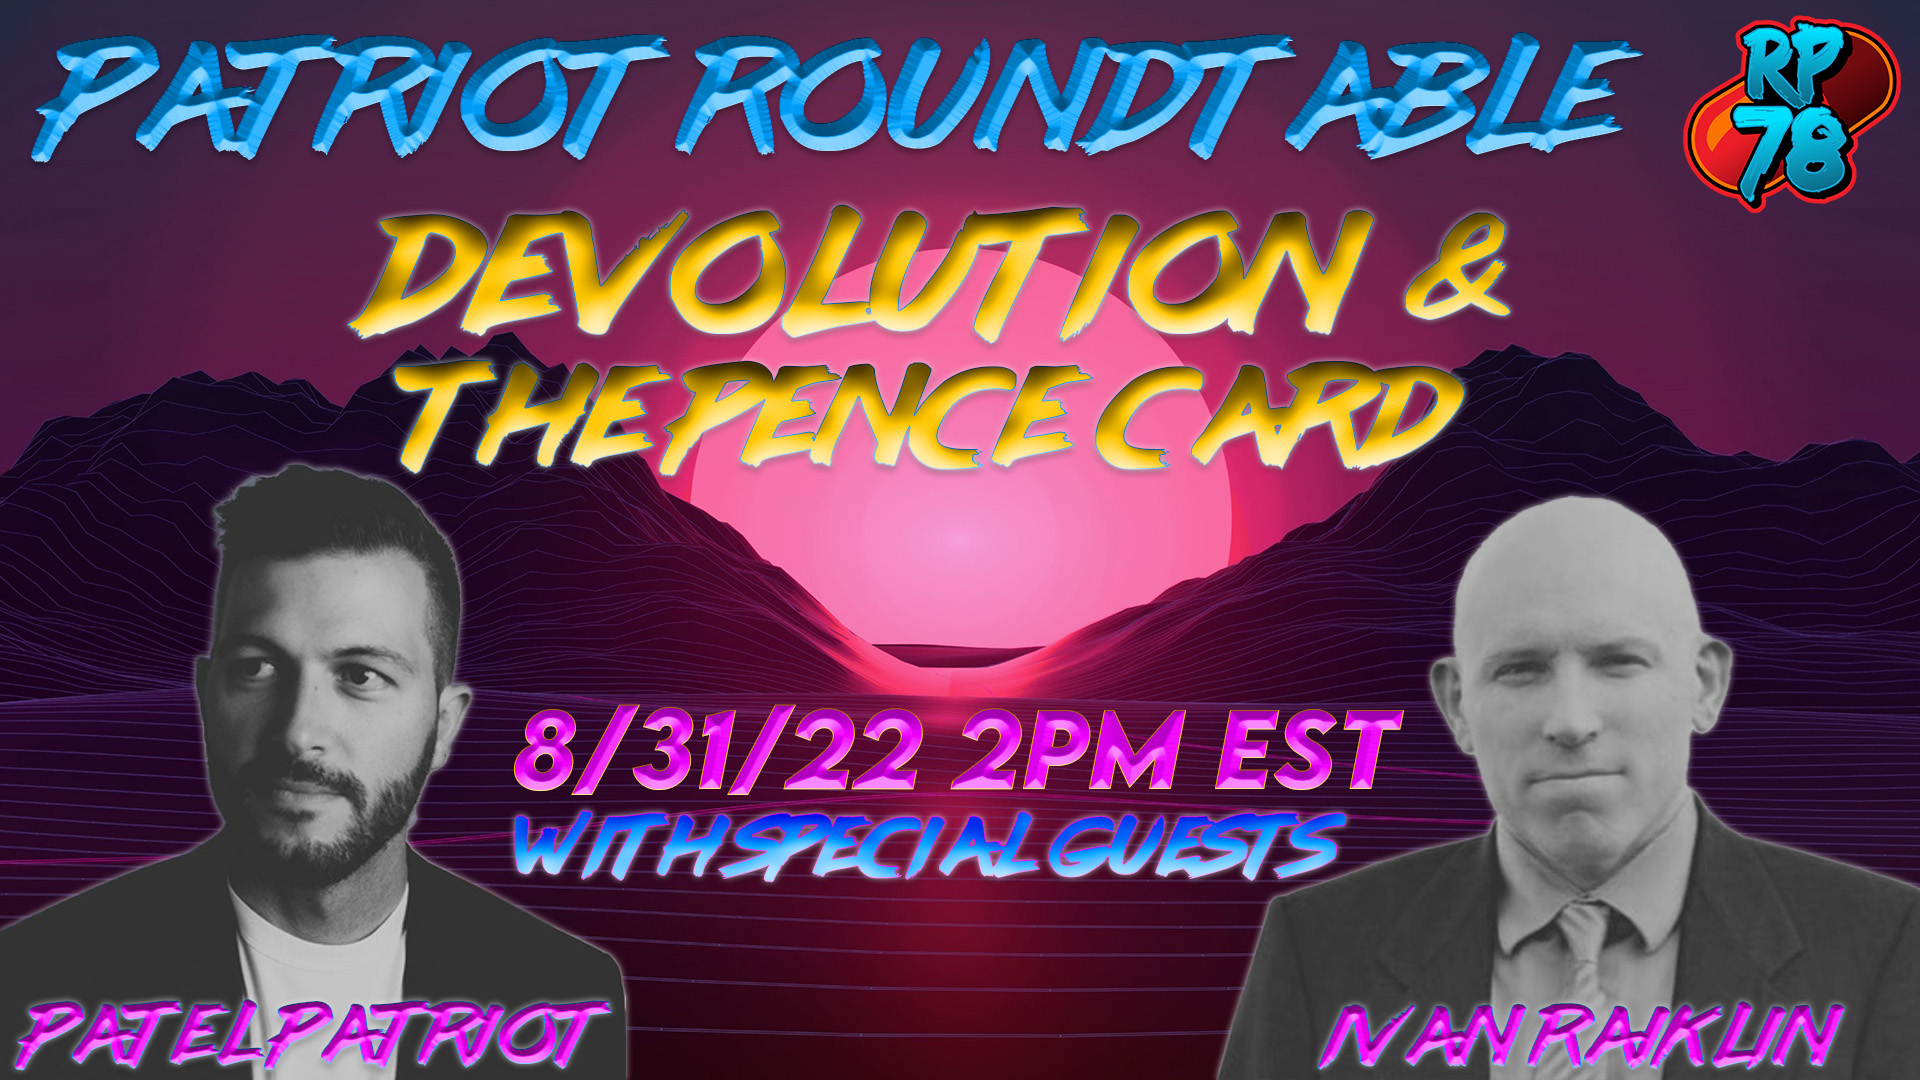 Patriot Roundtable with Ivan Raiklin & Patel Patriot - Devolution & the Pence Card on Red Pill News